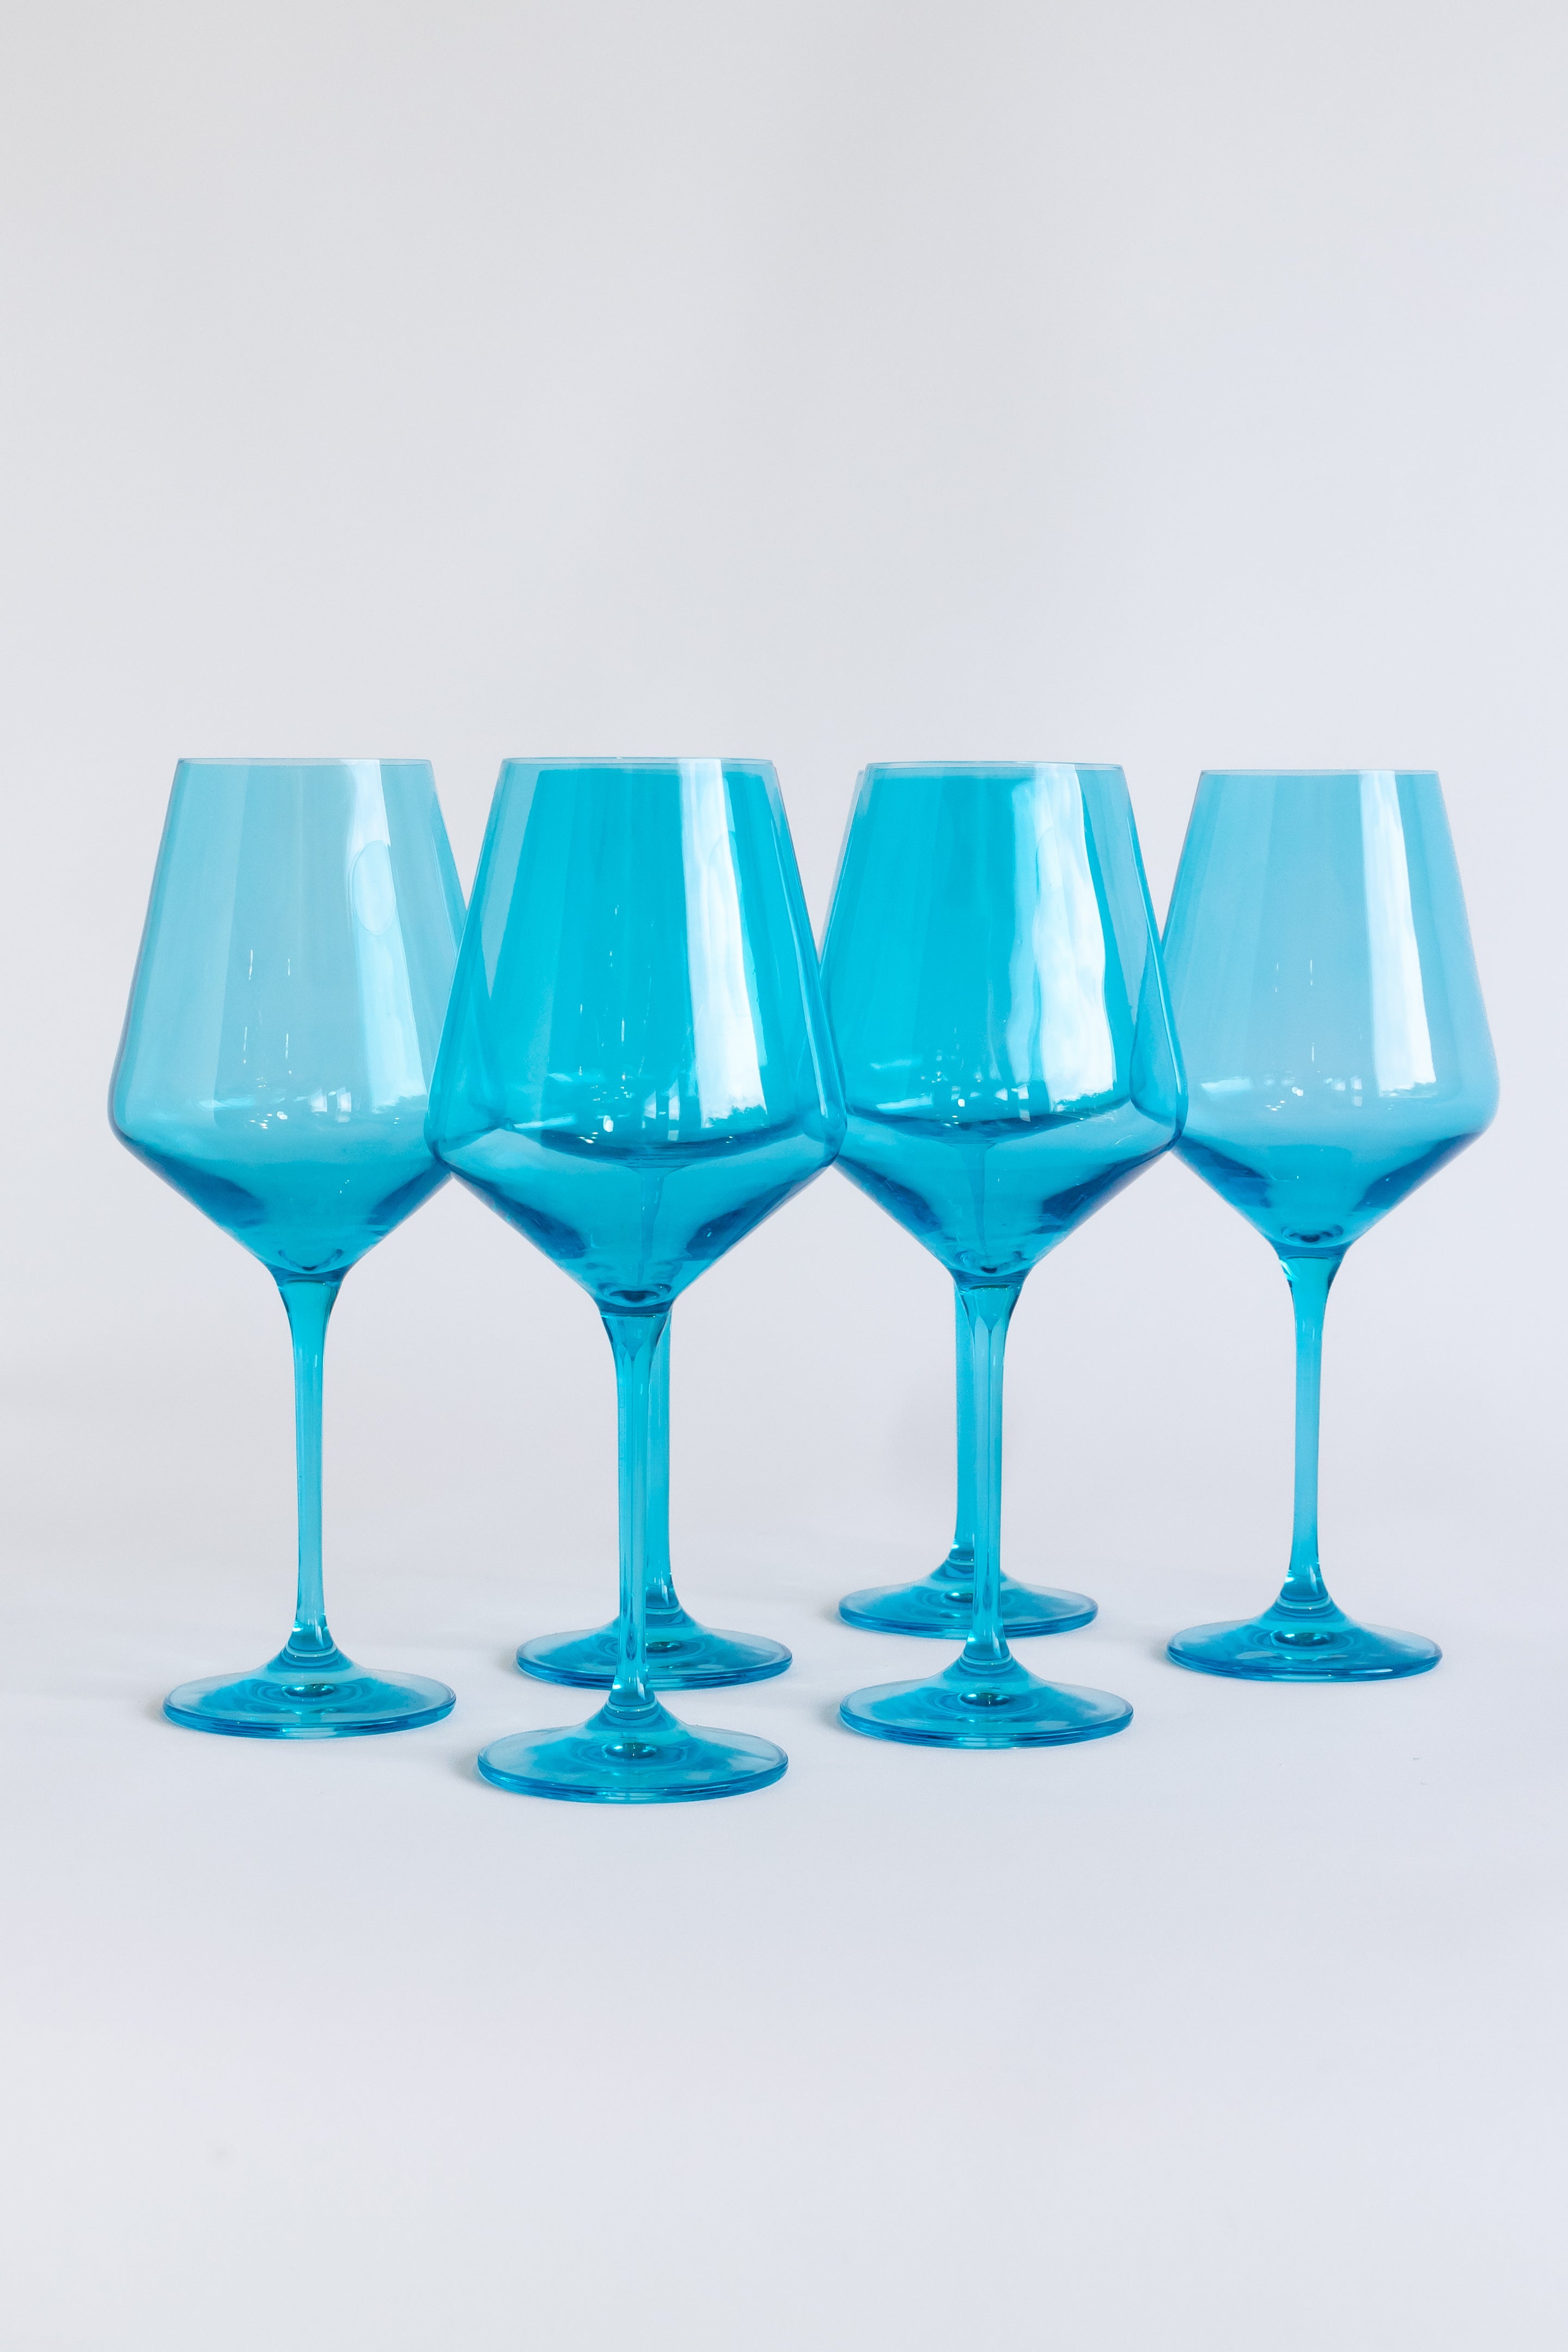 Estelle Colored Glass Estelle Hand-Blown Colored Wine Glasses (Set of 6) - Stemmed Wine Glass, Mixed Set